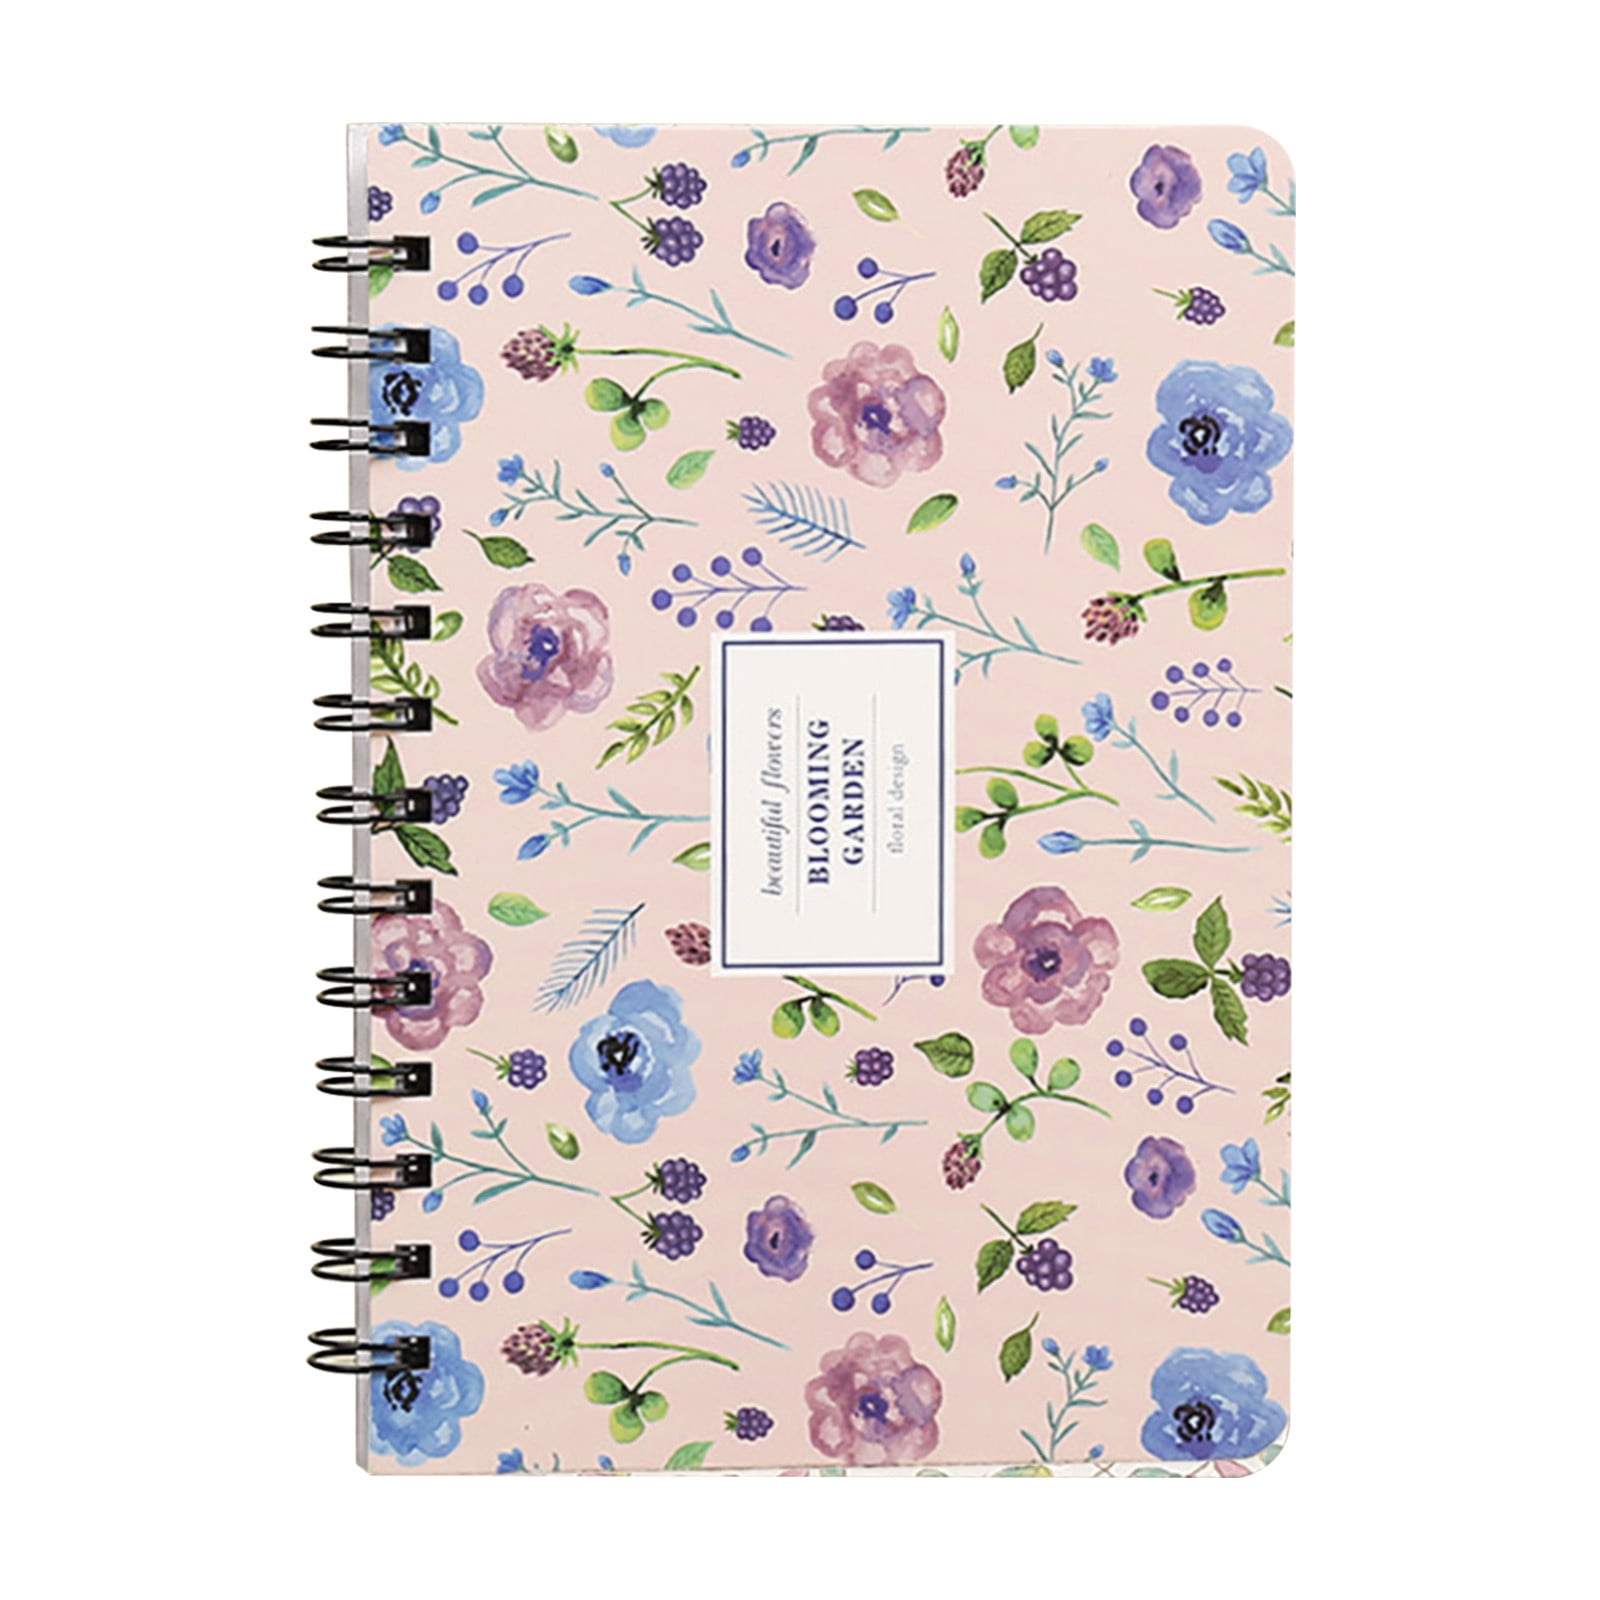 Shine Brightly! Spiral Notebook – Chinese American Family